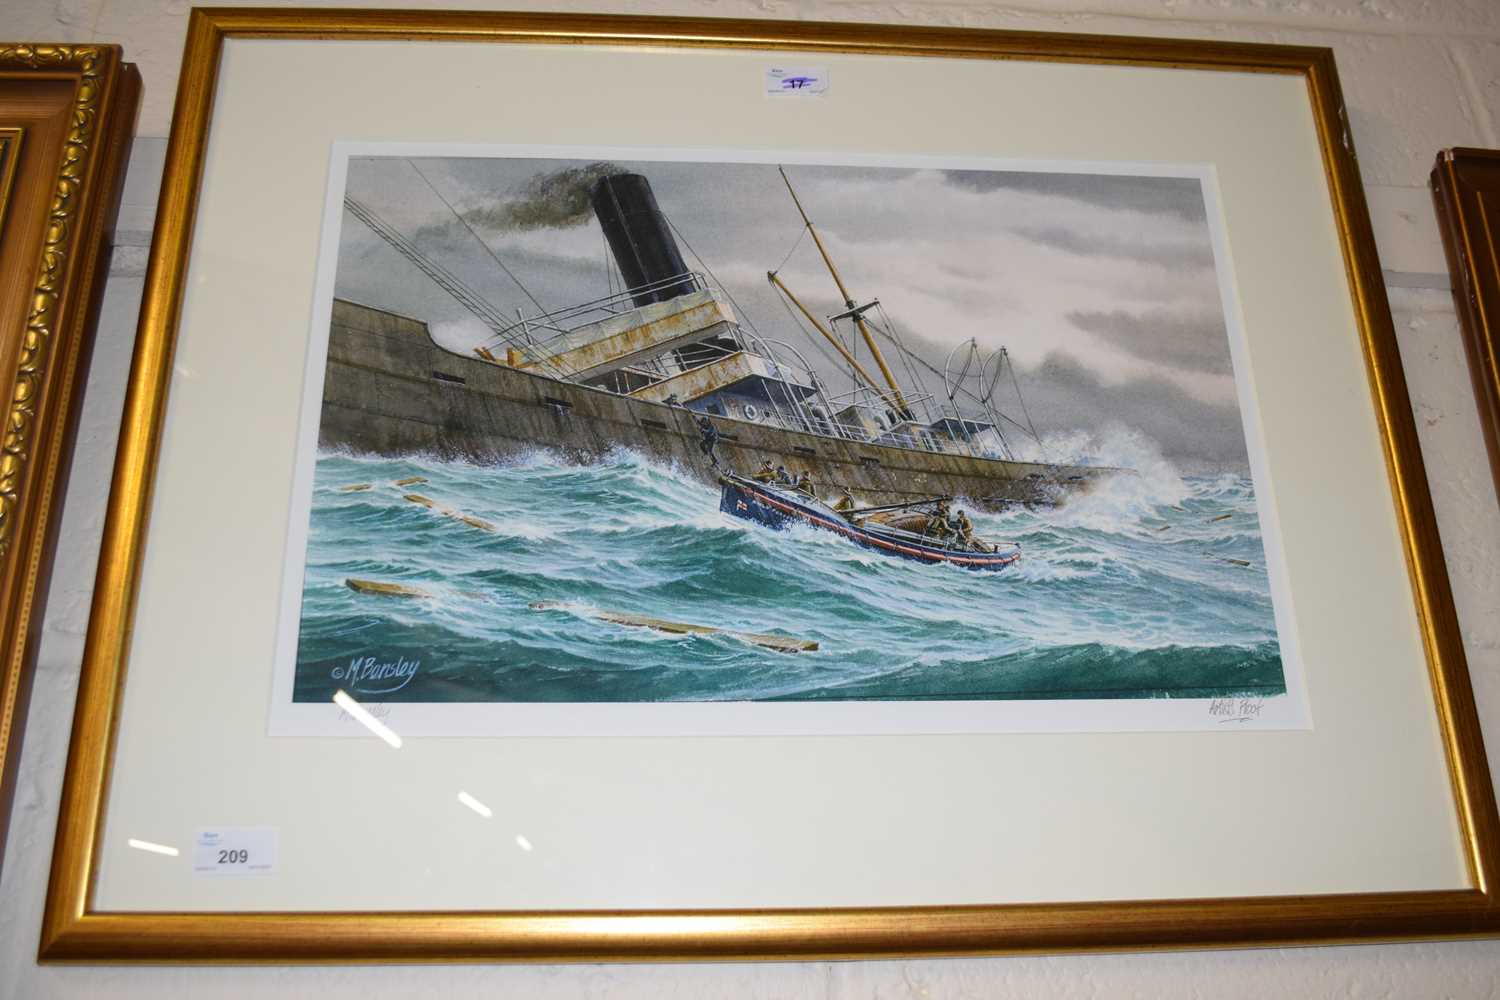 Michael Bensley (British,B.1959), The ANLB Foresters ship rescue, chromolithograph, artist's